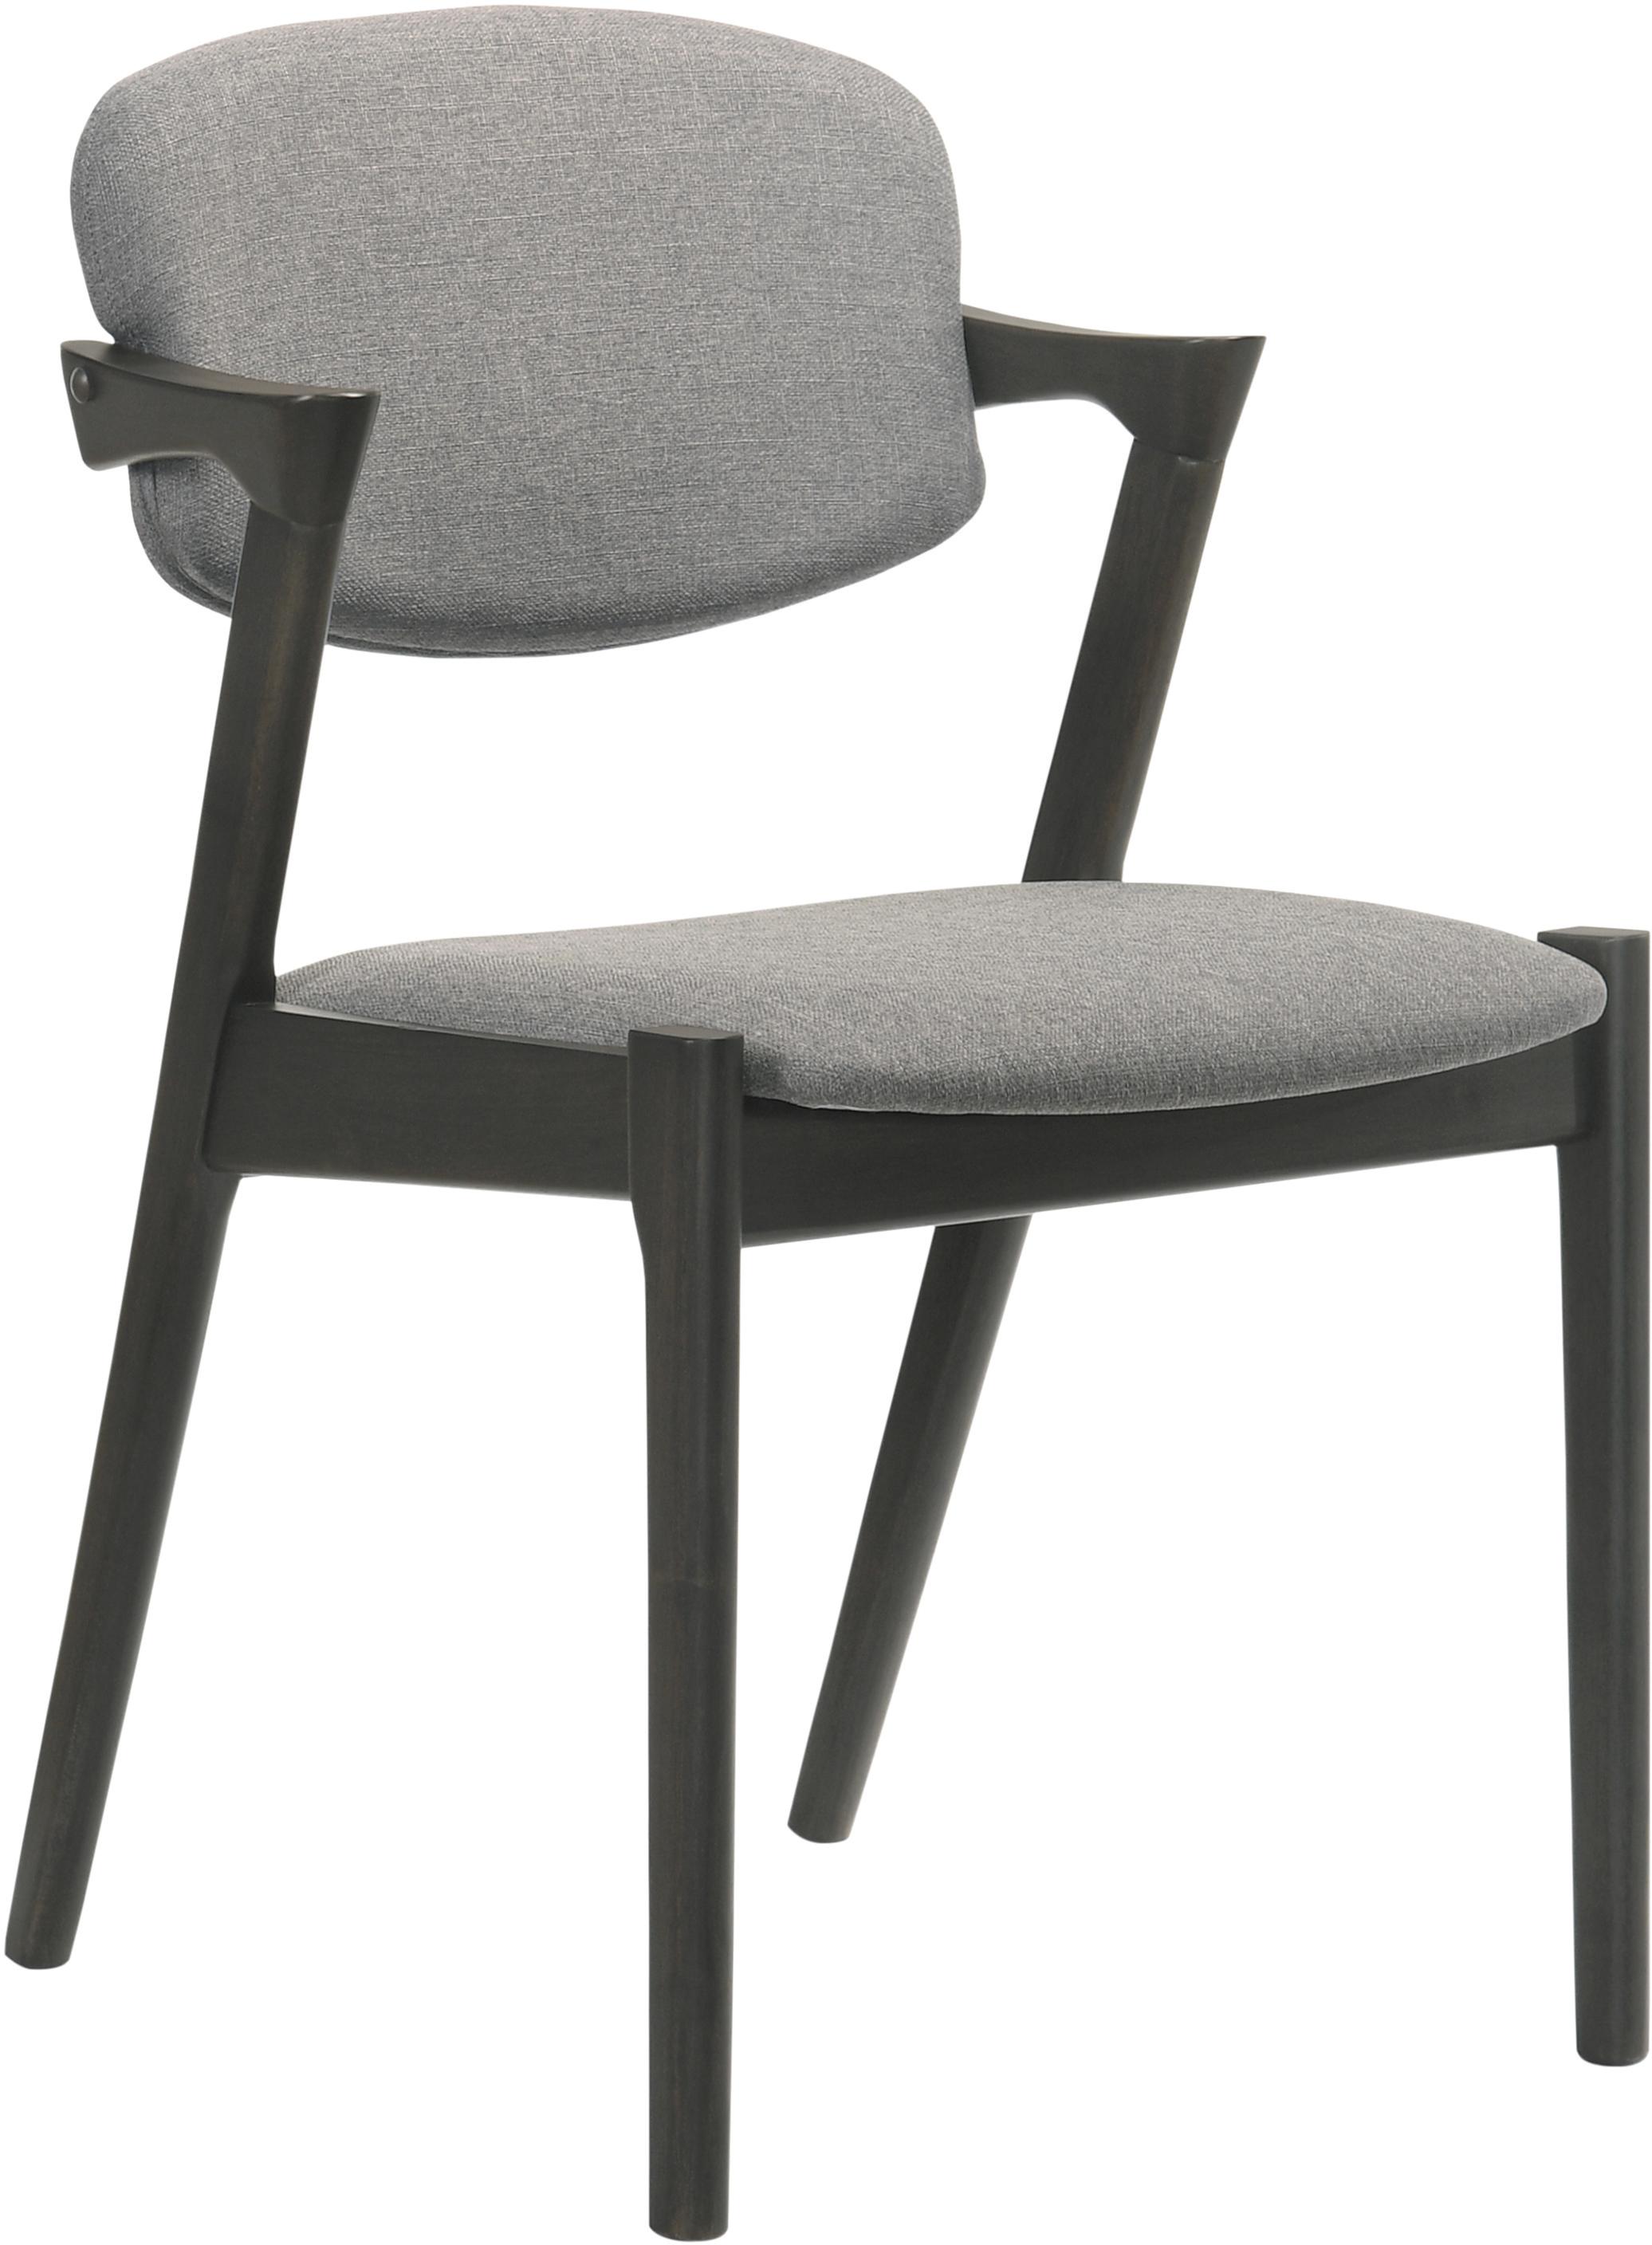 Modern Side Chair Set 115112 Stevie 115112 in Gray Fabric